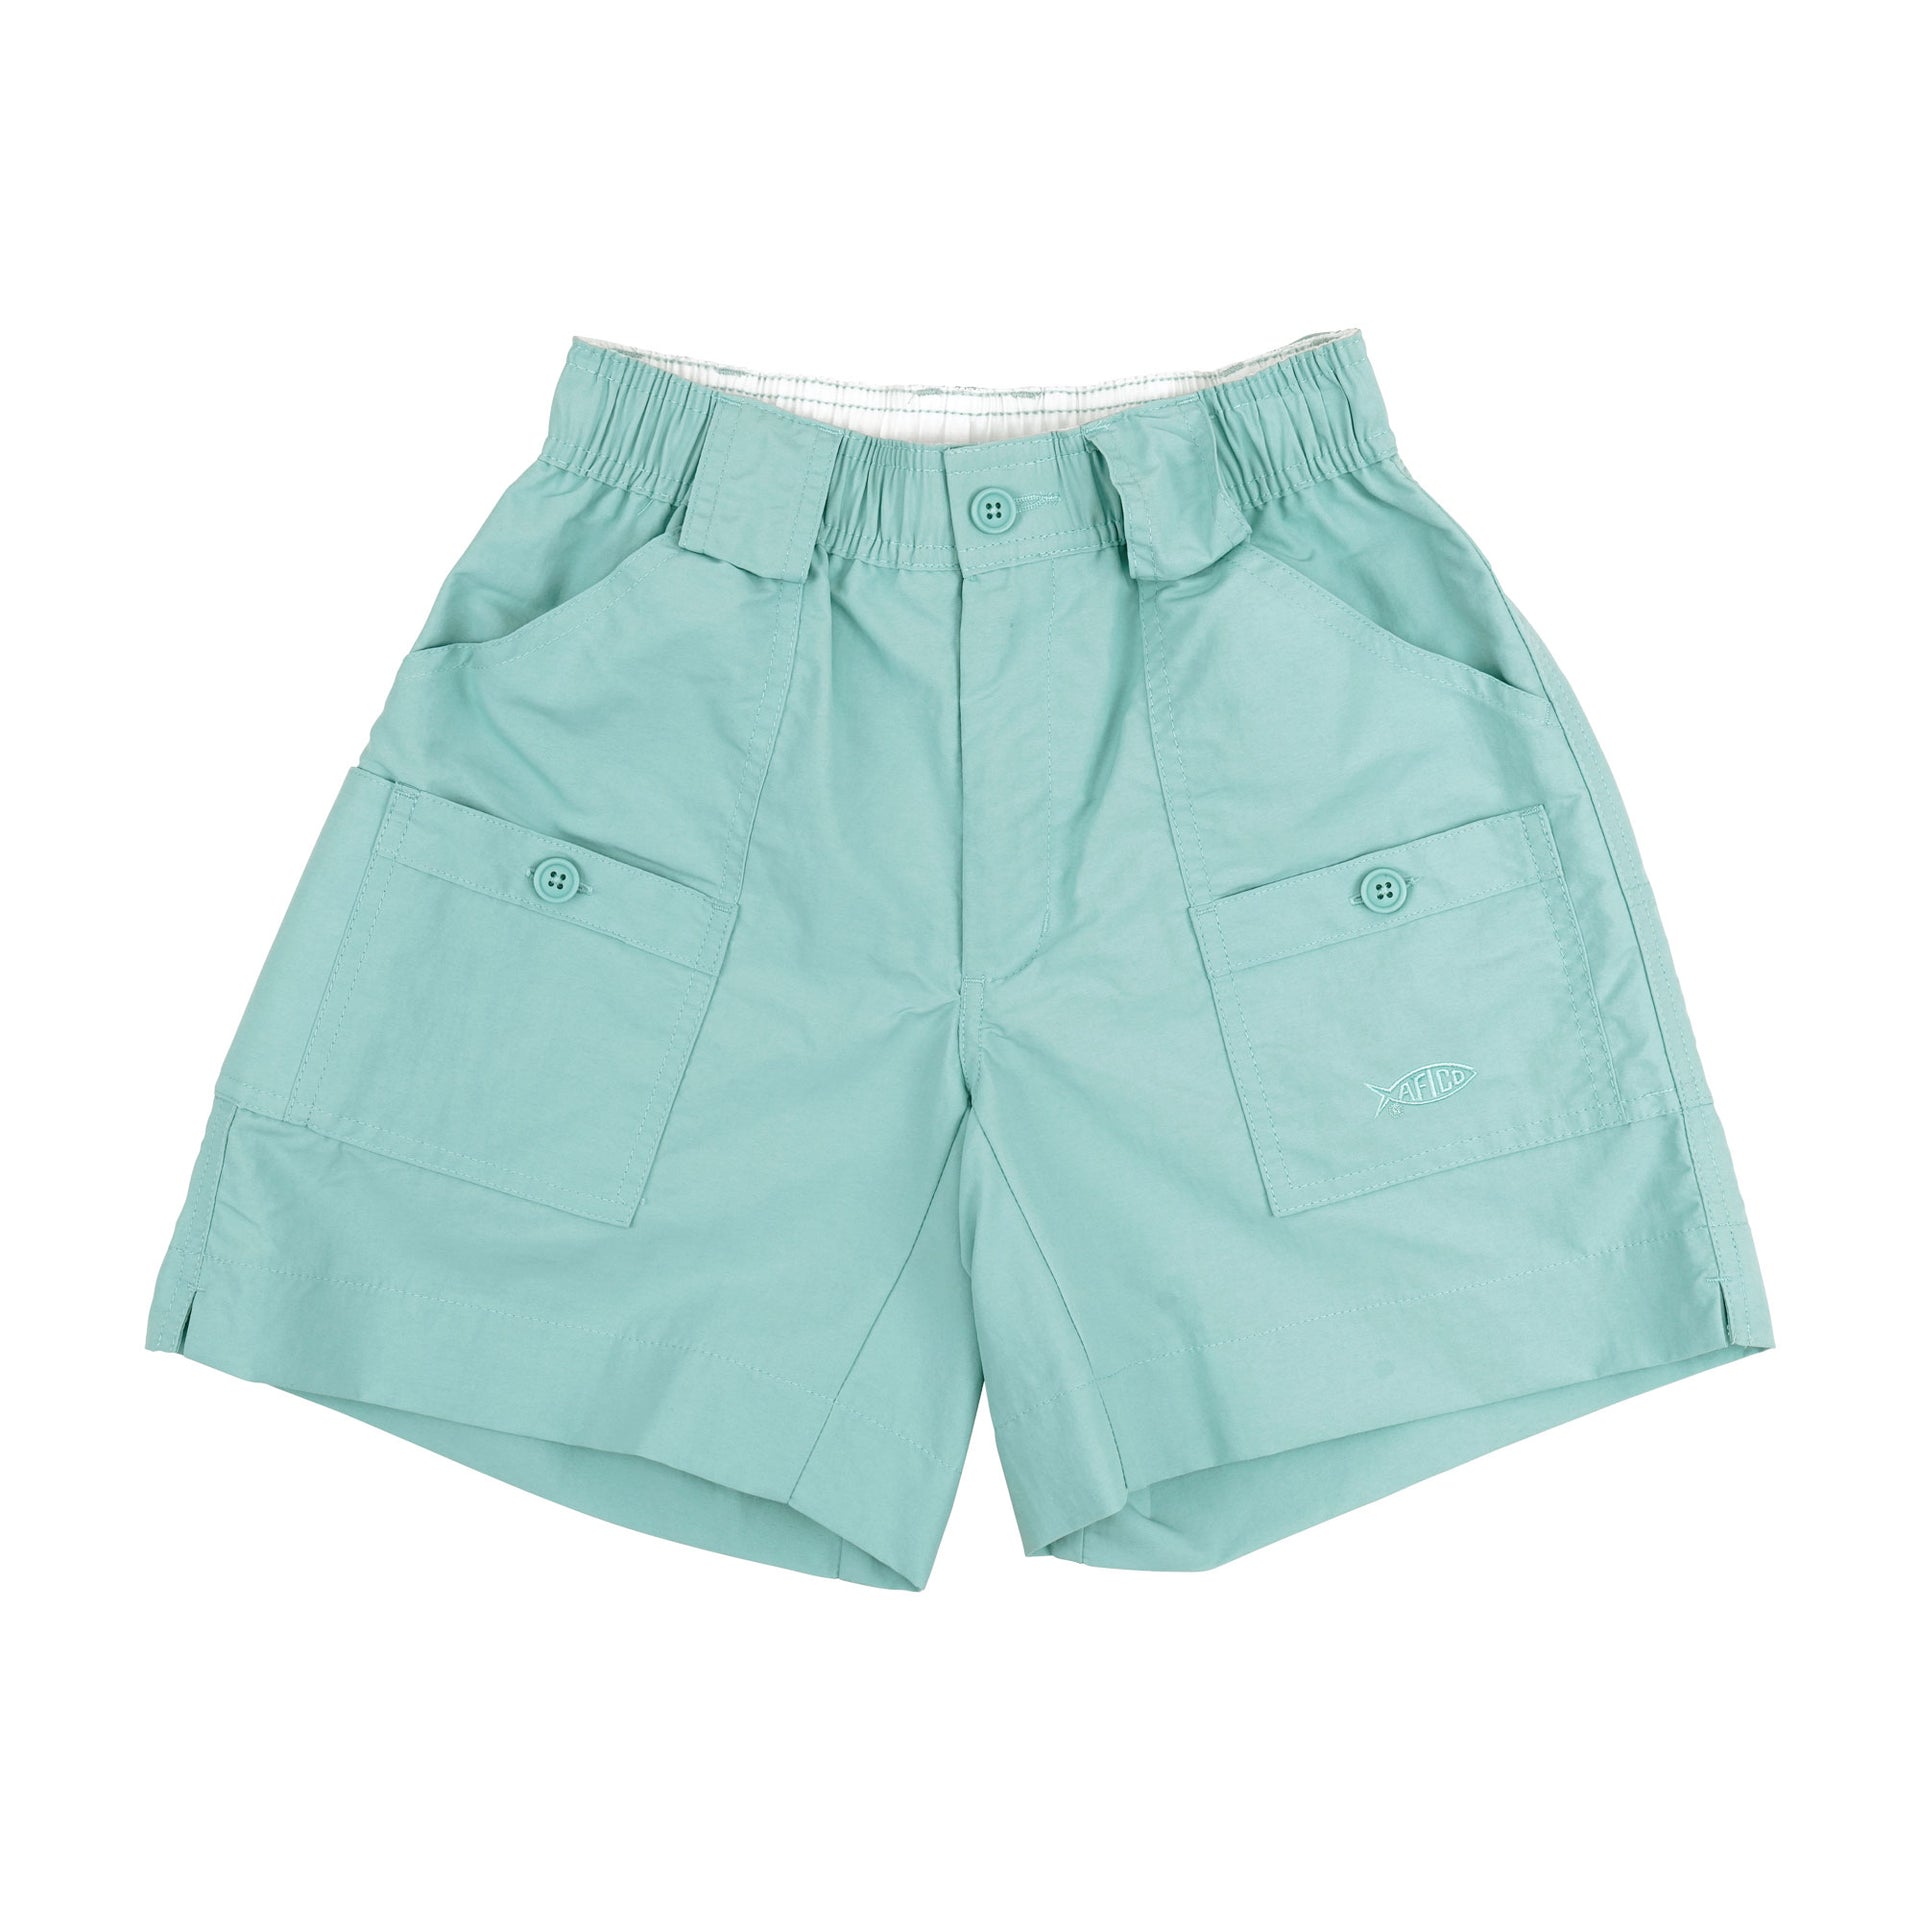 AFTCO, Bottoms, Kids Aftco Youth Original Fishing Shorts